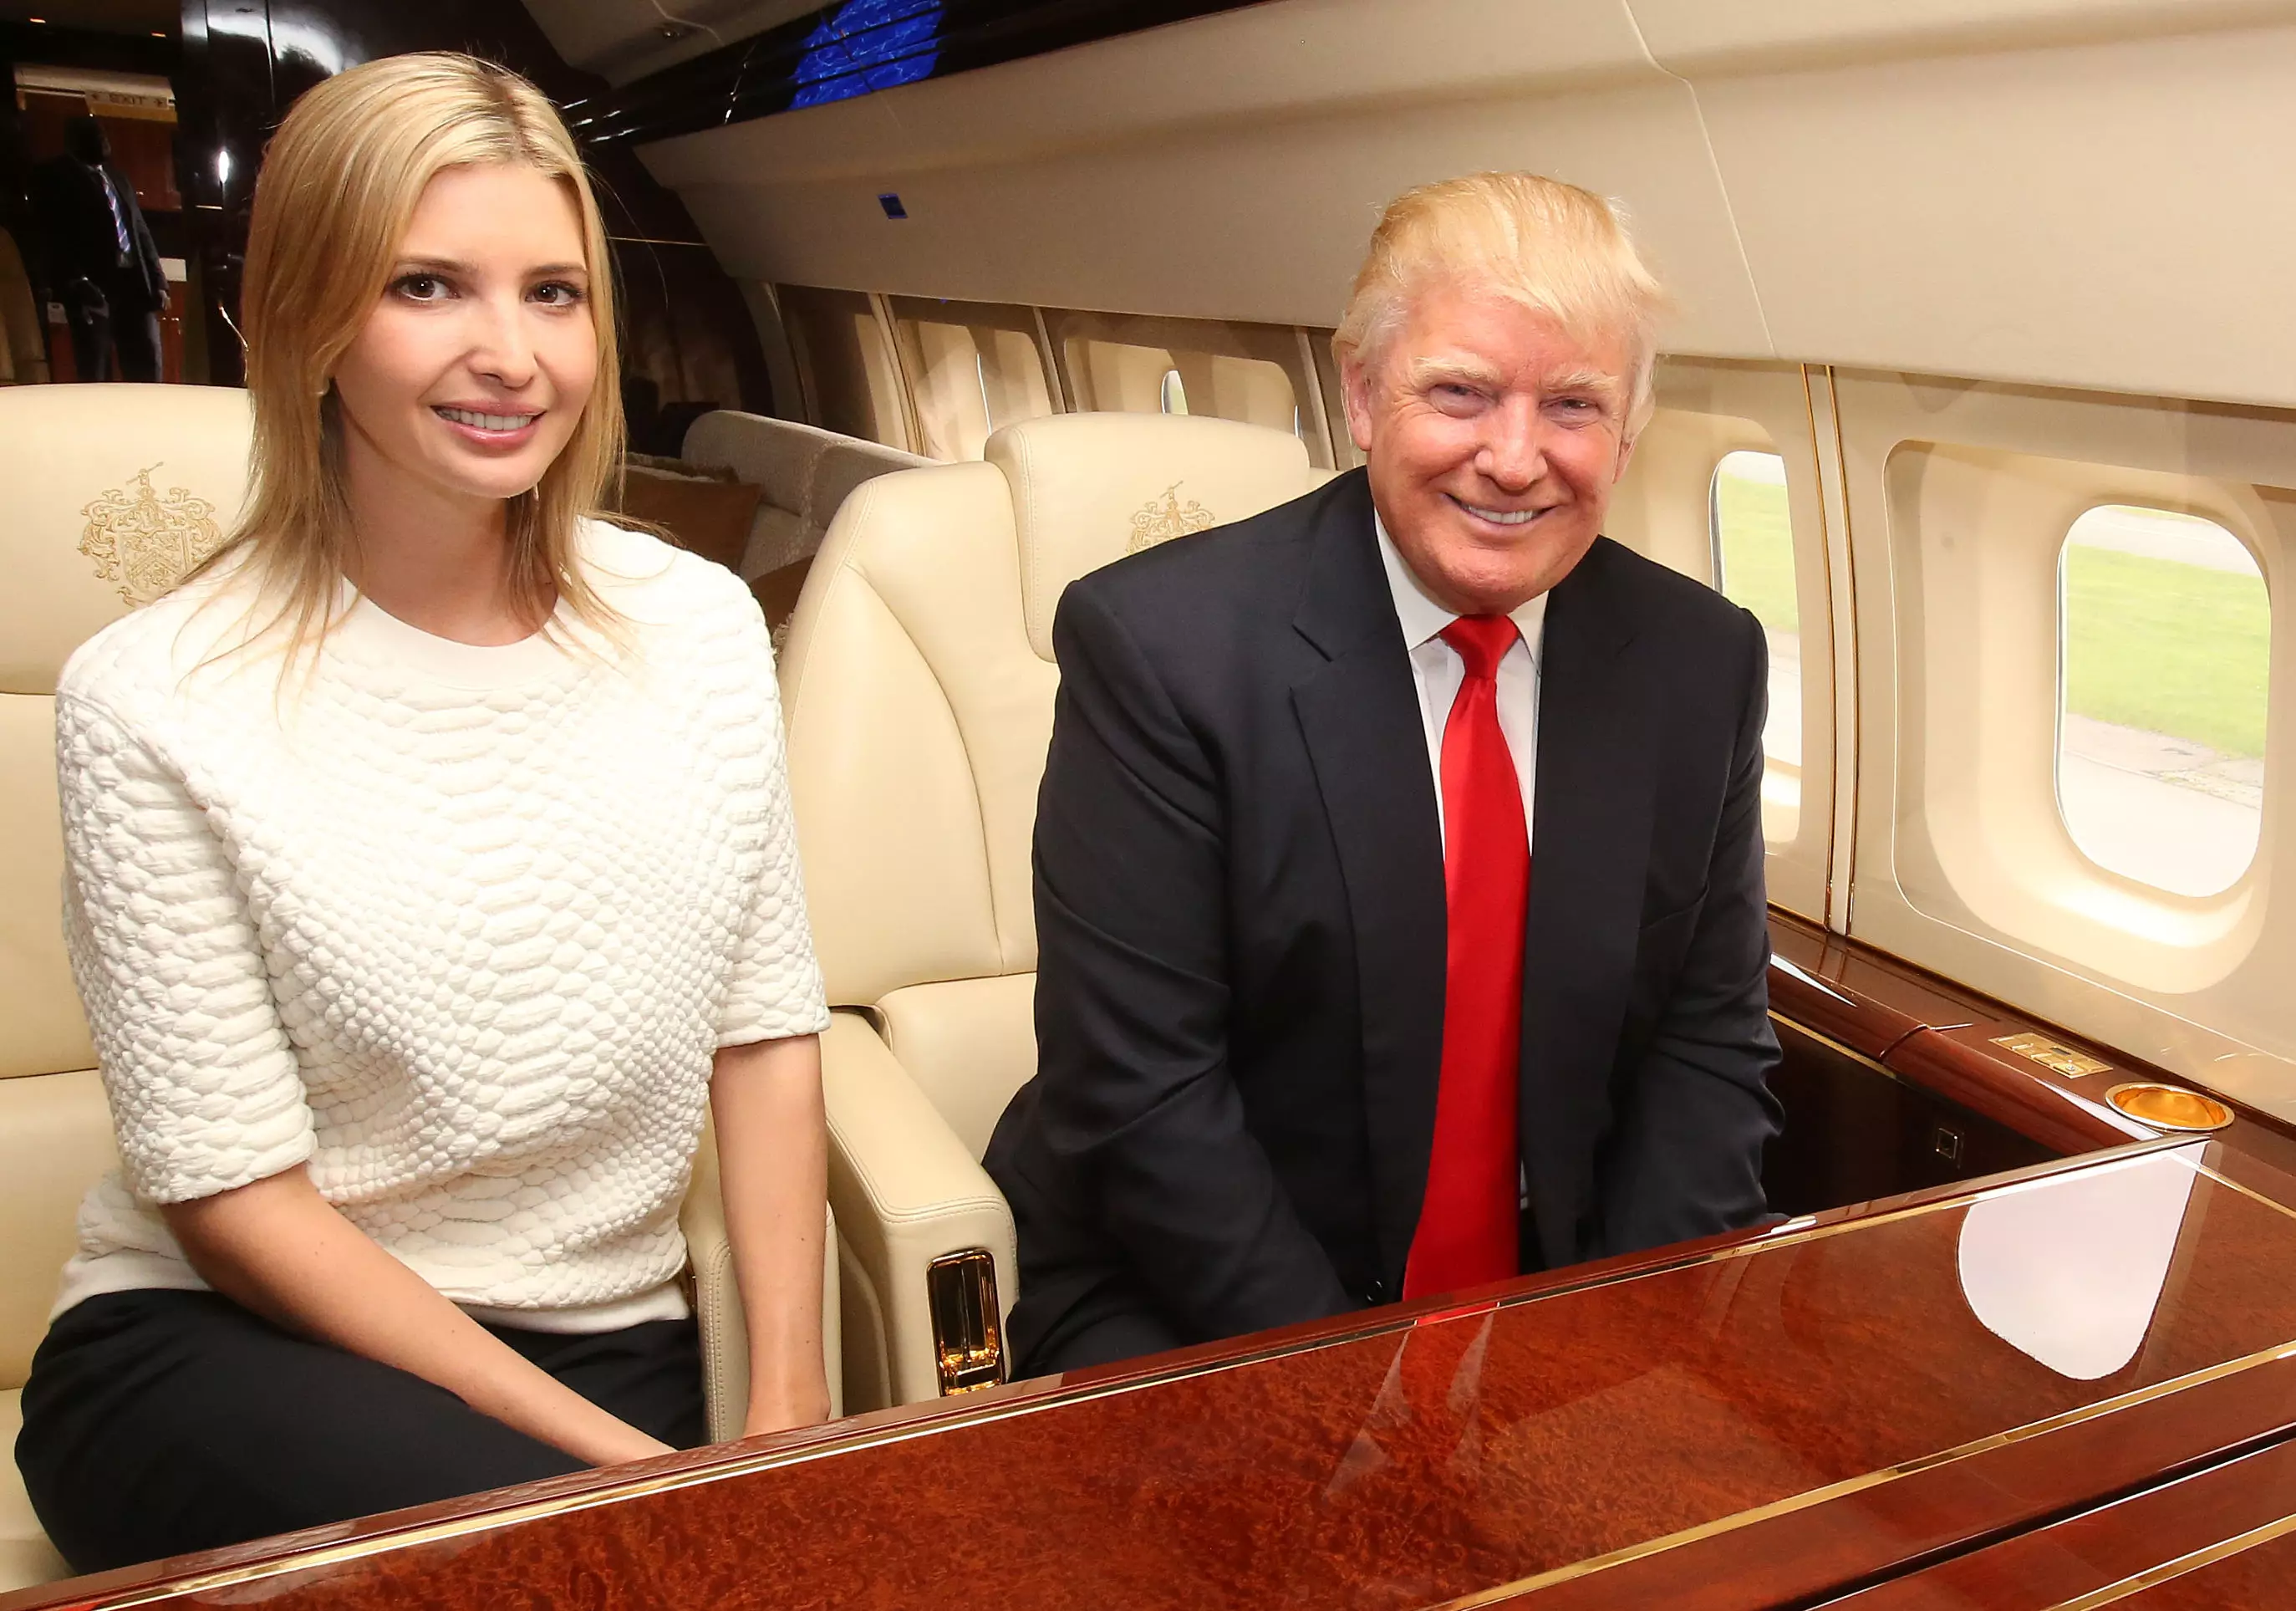 Ivanka Trump pledged her father's support for equal pay (